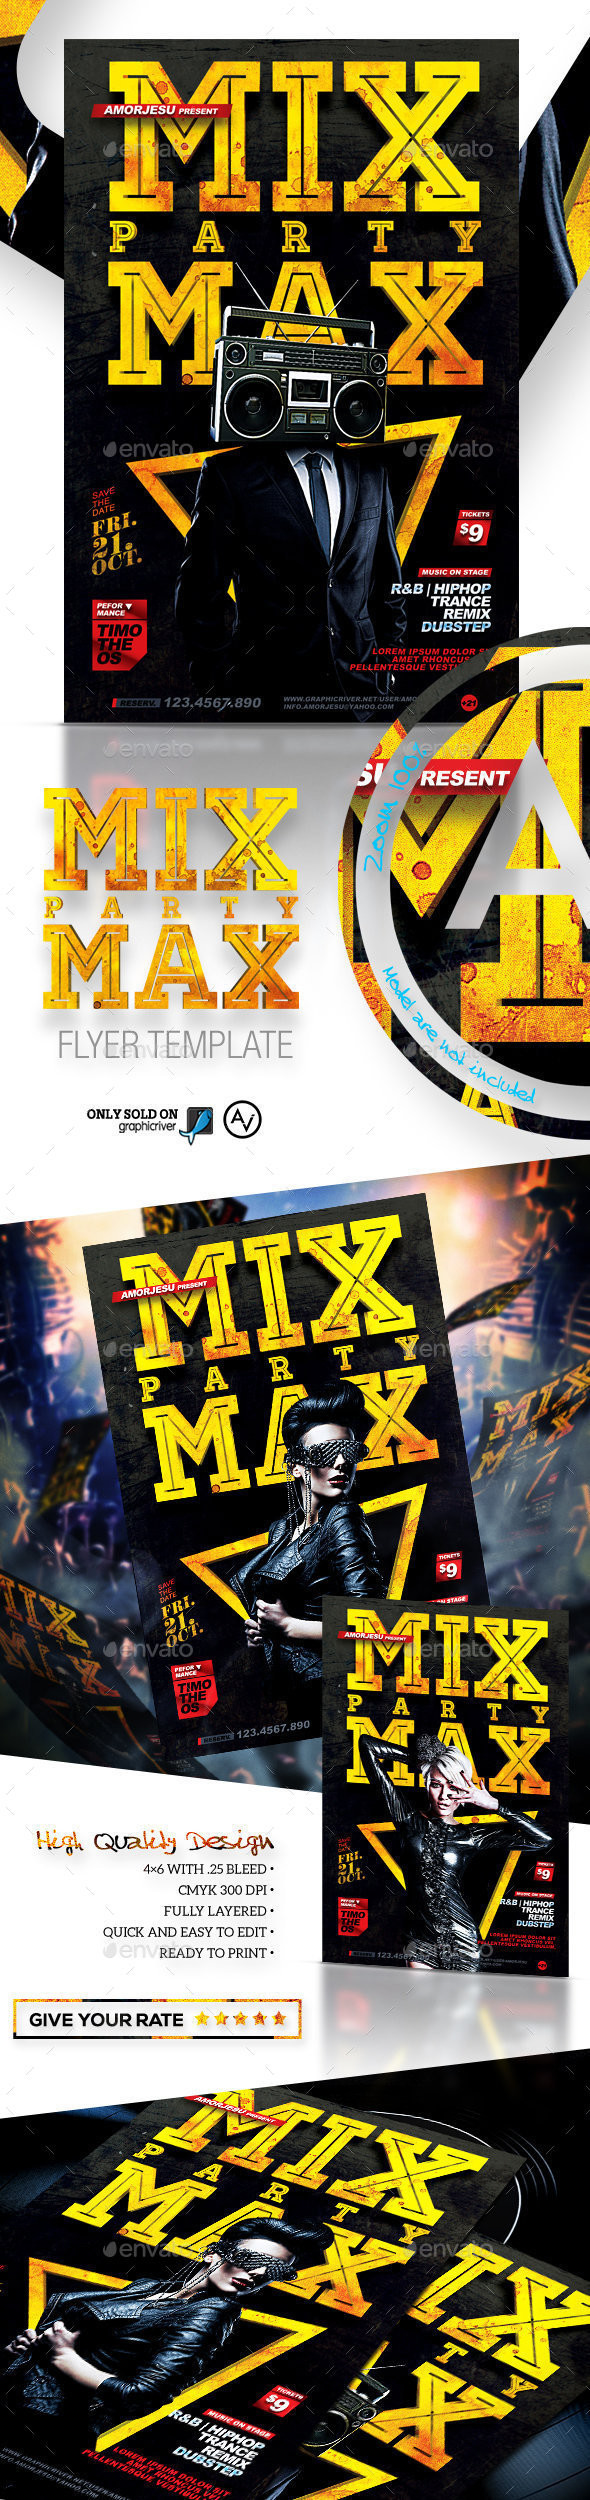 Preview 20  20mix 20max 20party 20flyer 20template 20 design 20by 20amorjesu 